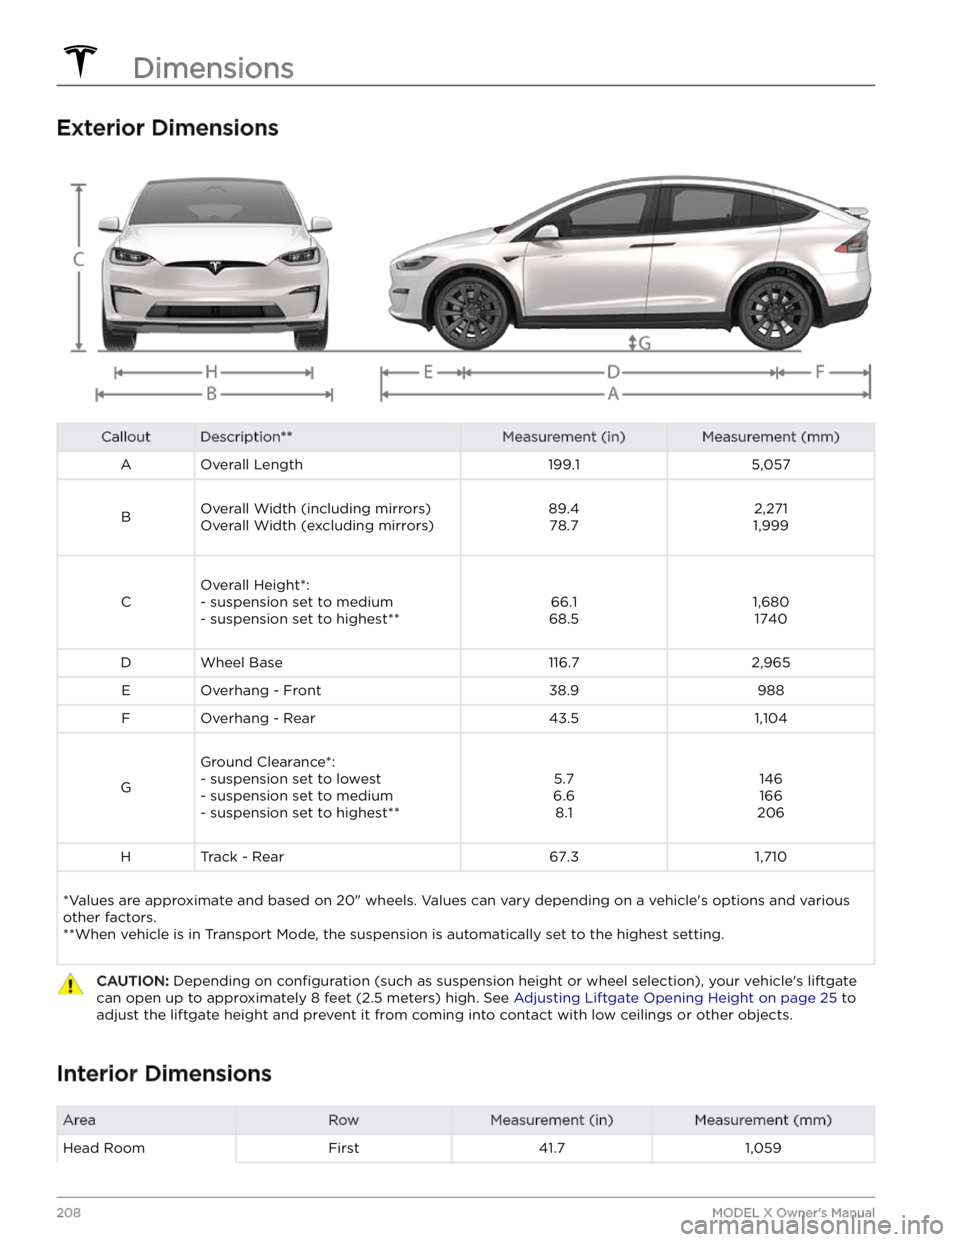 TESLA MODEL X 2023  Owners Manual Exterior Dimensions
CalloutDescription**Measurement (in)Measurement (mm)AOverall Length199.15,057
BOverall Width (including mirrors)Overall Width (excluding mirrors)89.4 78.72,271
1,999
C
Overall Heig